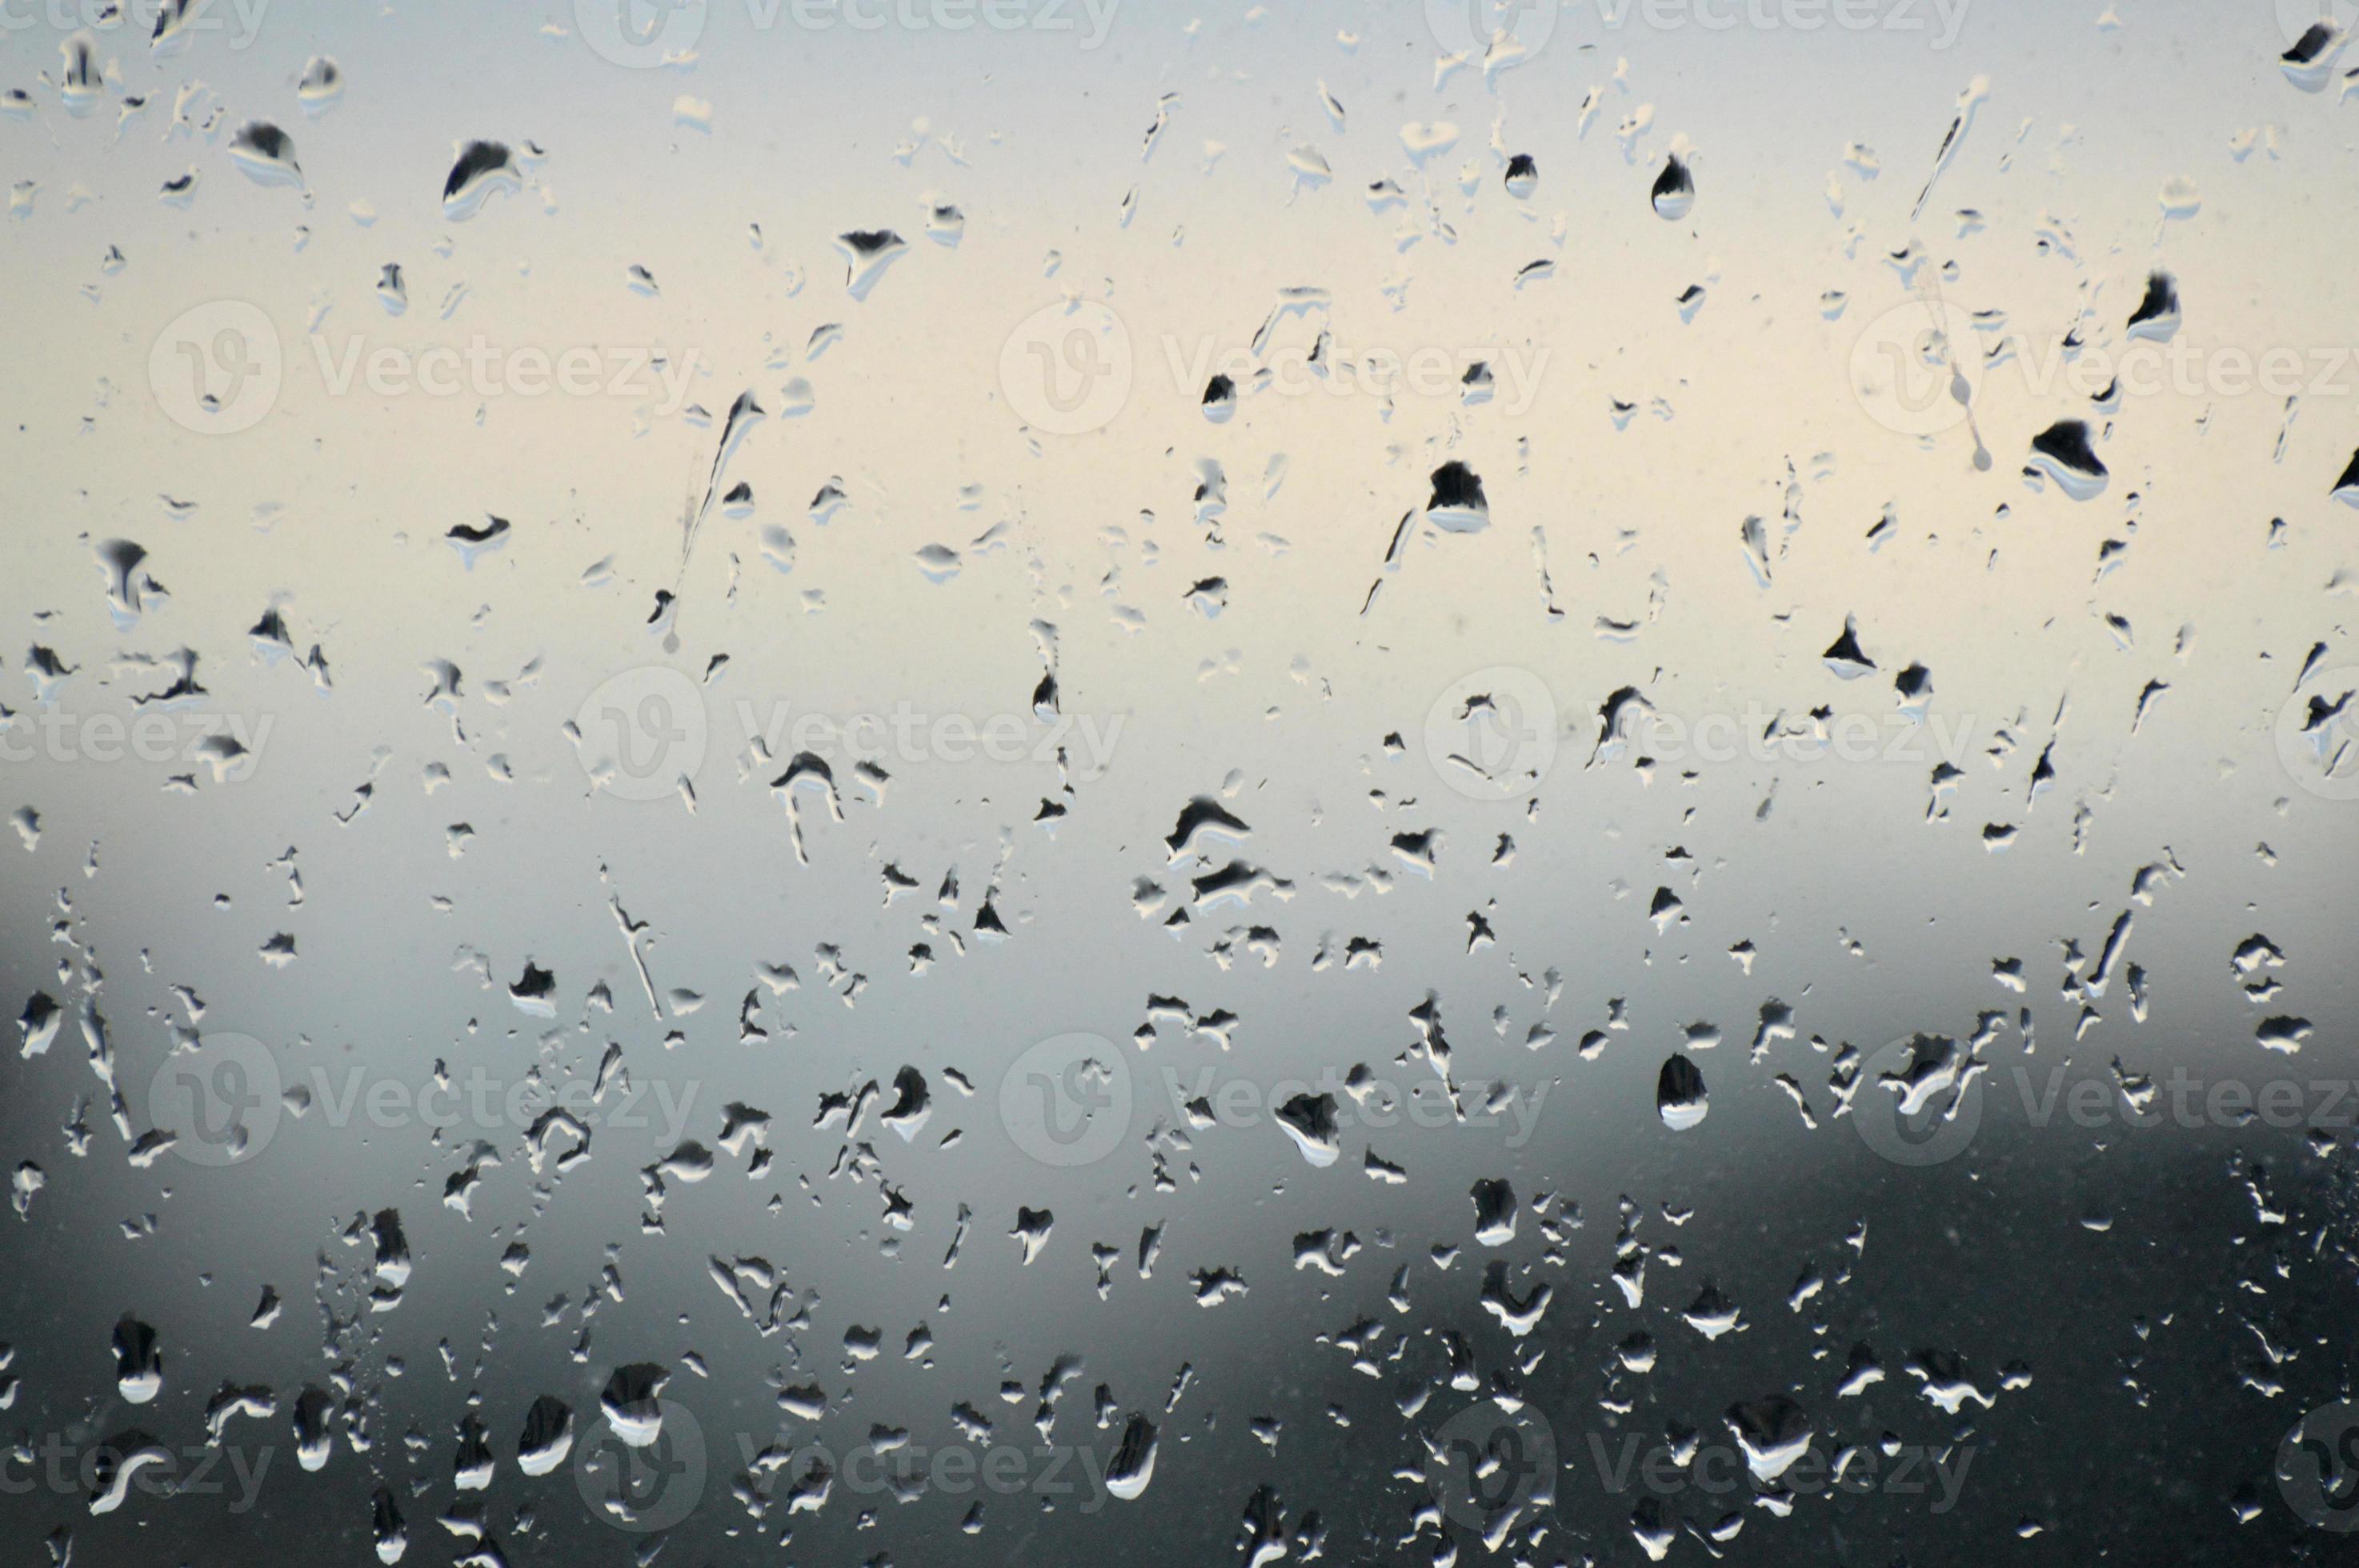 Abstract photo background. Rain drops on window. Selective focus, rainy  city background. Water drops on glass. Rainy weather, blur wallpaper  4805637 Stock Photo at Vecteezy